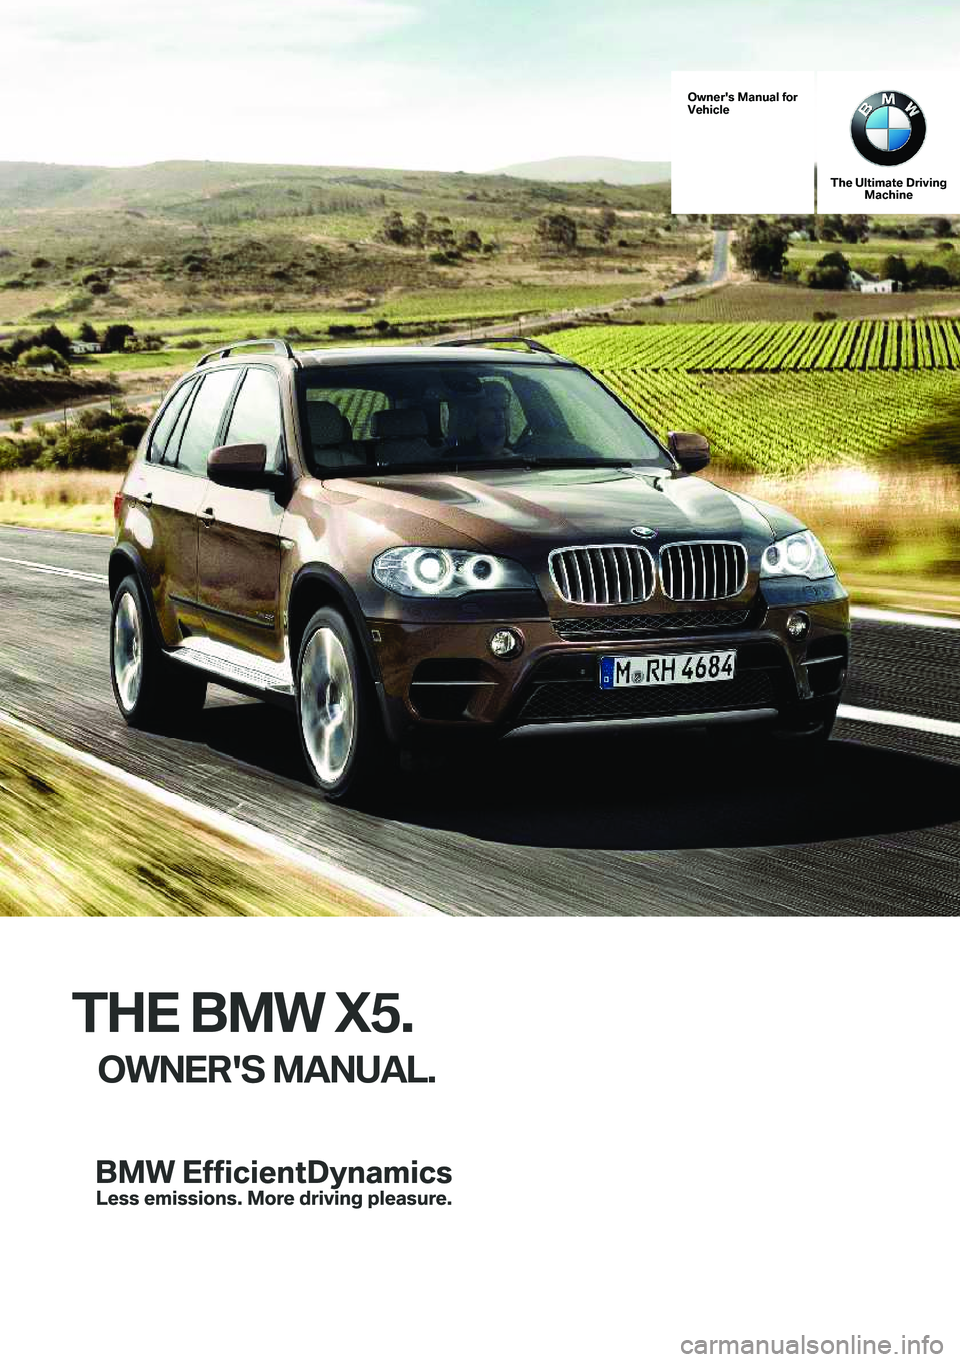 BMW X5 XDRIVE 35I SPORT ACTIVITY 2013  Owners Manual Owner's Manual for
Vehicle
The Ultimate Driving Machine
THE BMW X5.
OWNER'S MANUAL.
ContentsA-Z
Online Edition for Part no. 01 40 2 918 395 - III/13   